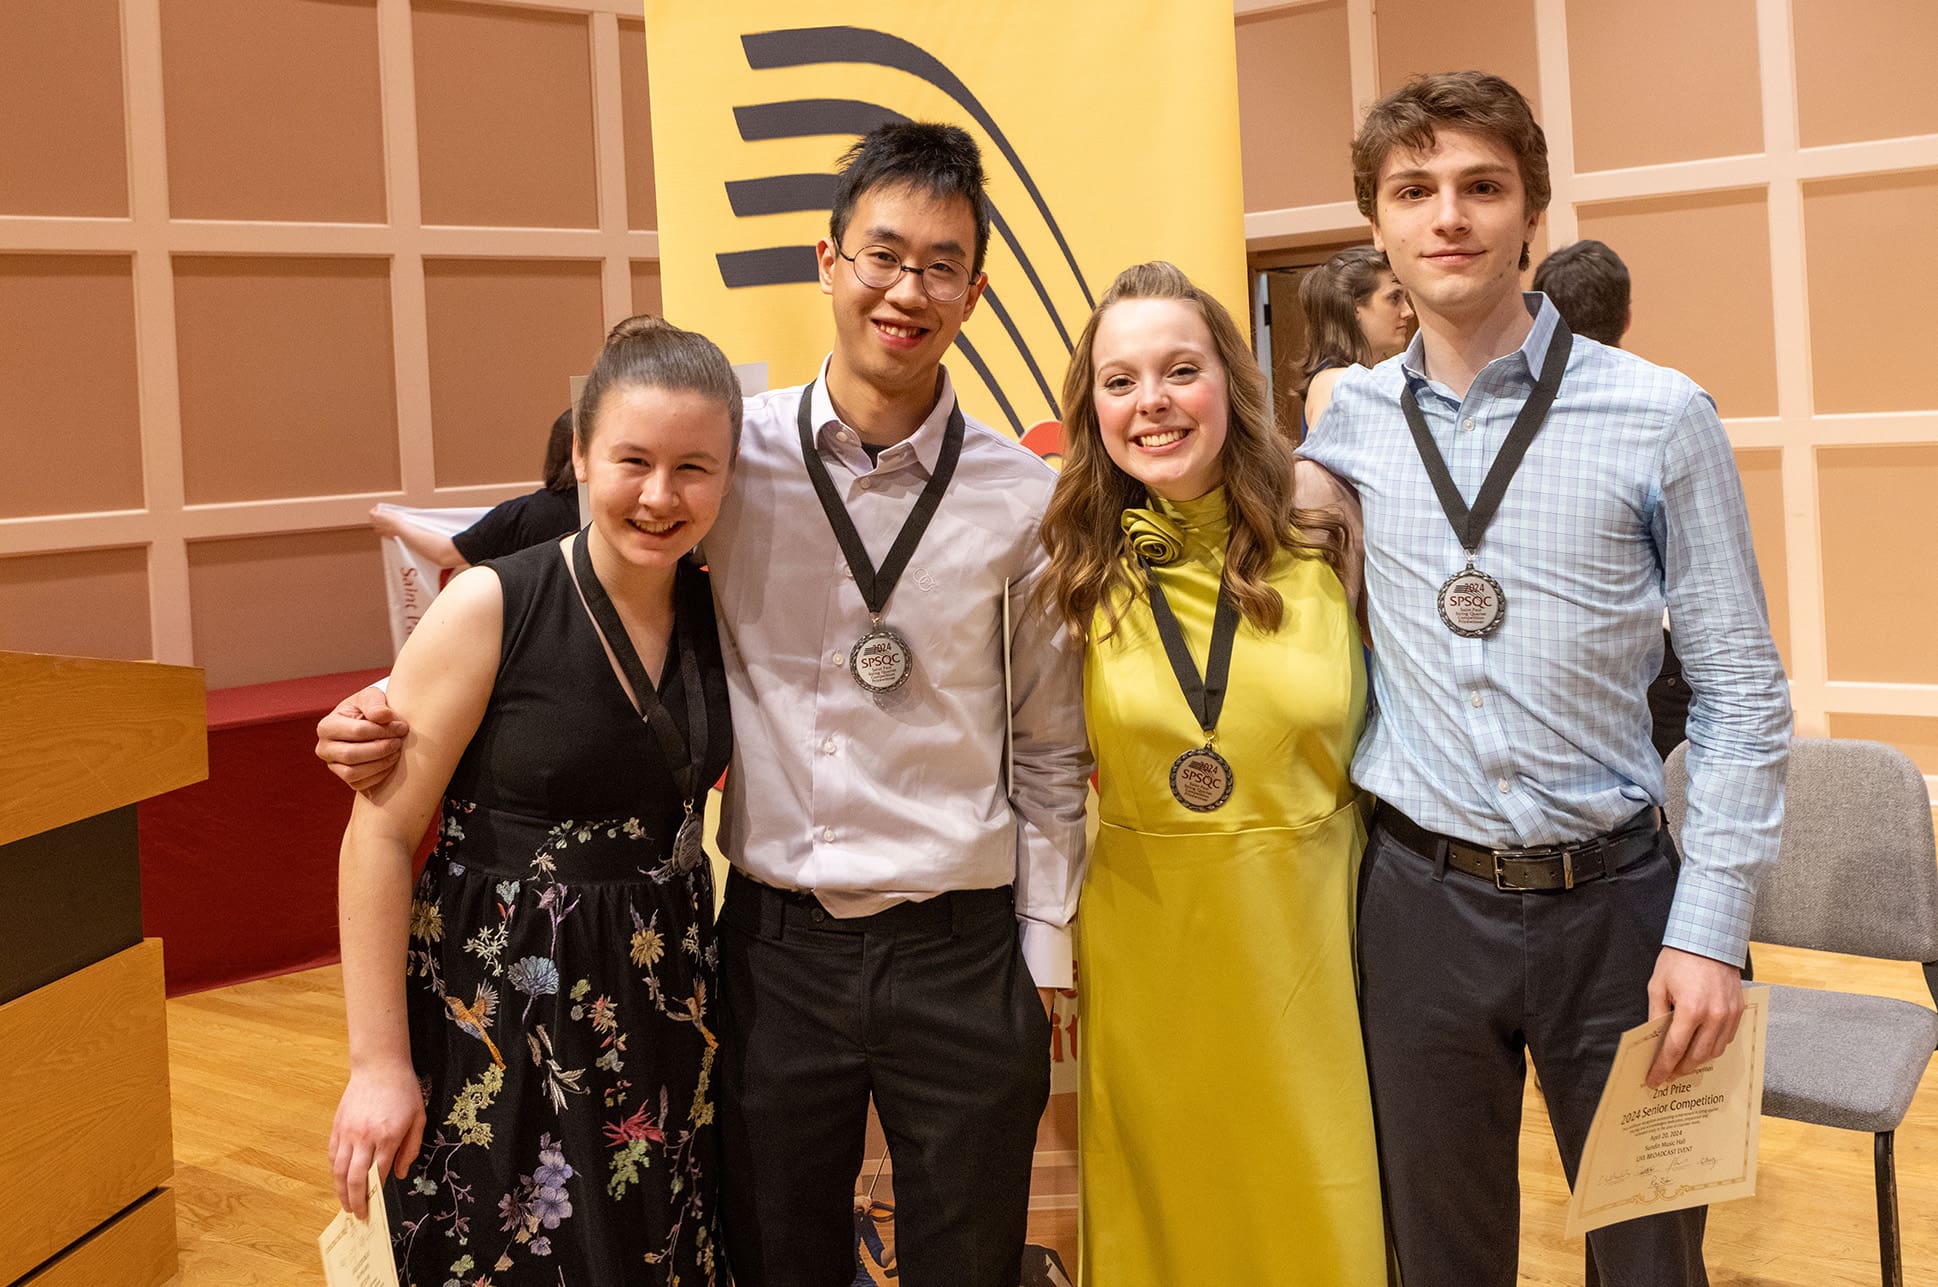 Four students wearing medals after receiving an award.